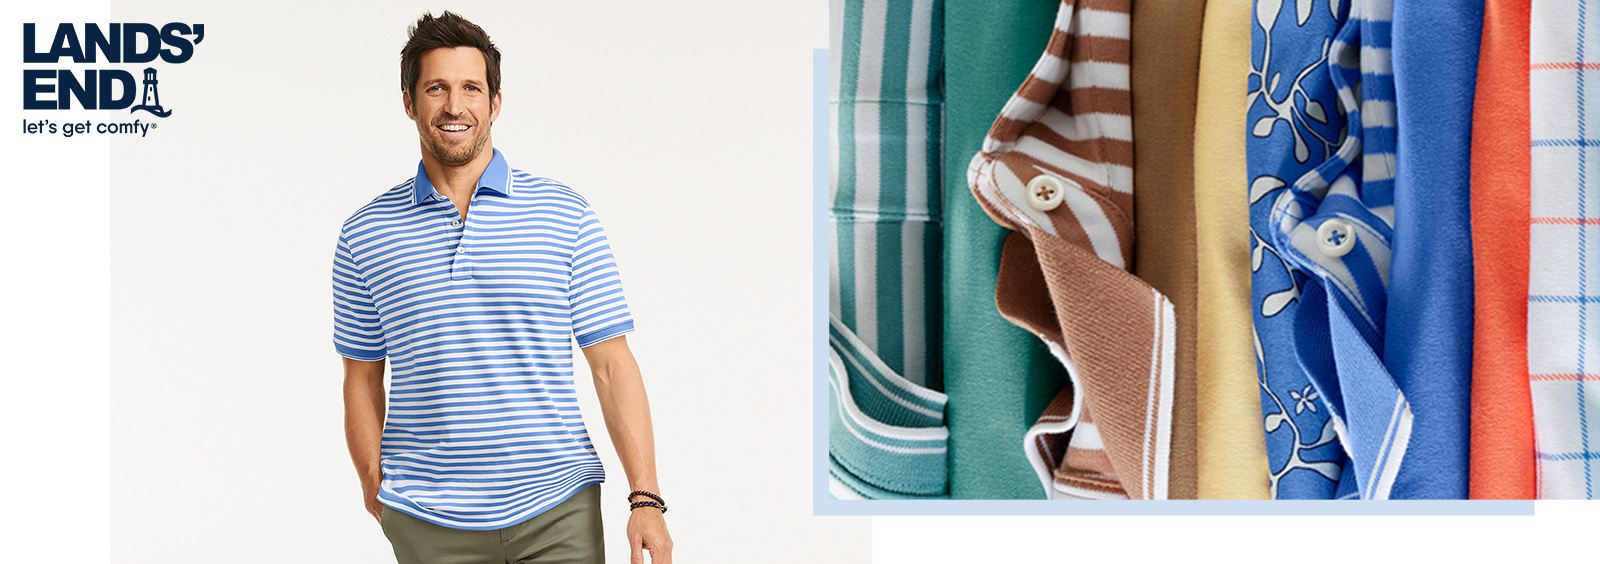 Best Men’s Shirts for Outdoor Dining This Summer